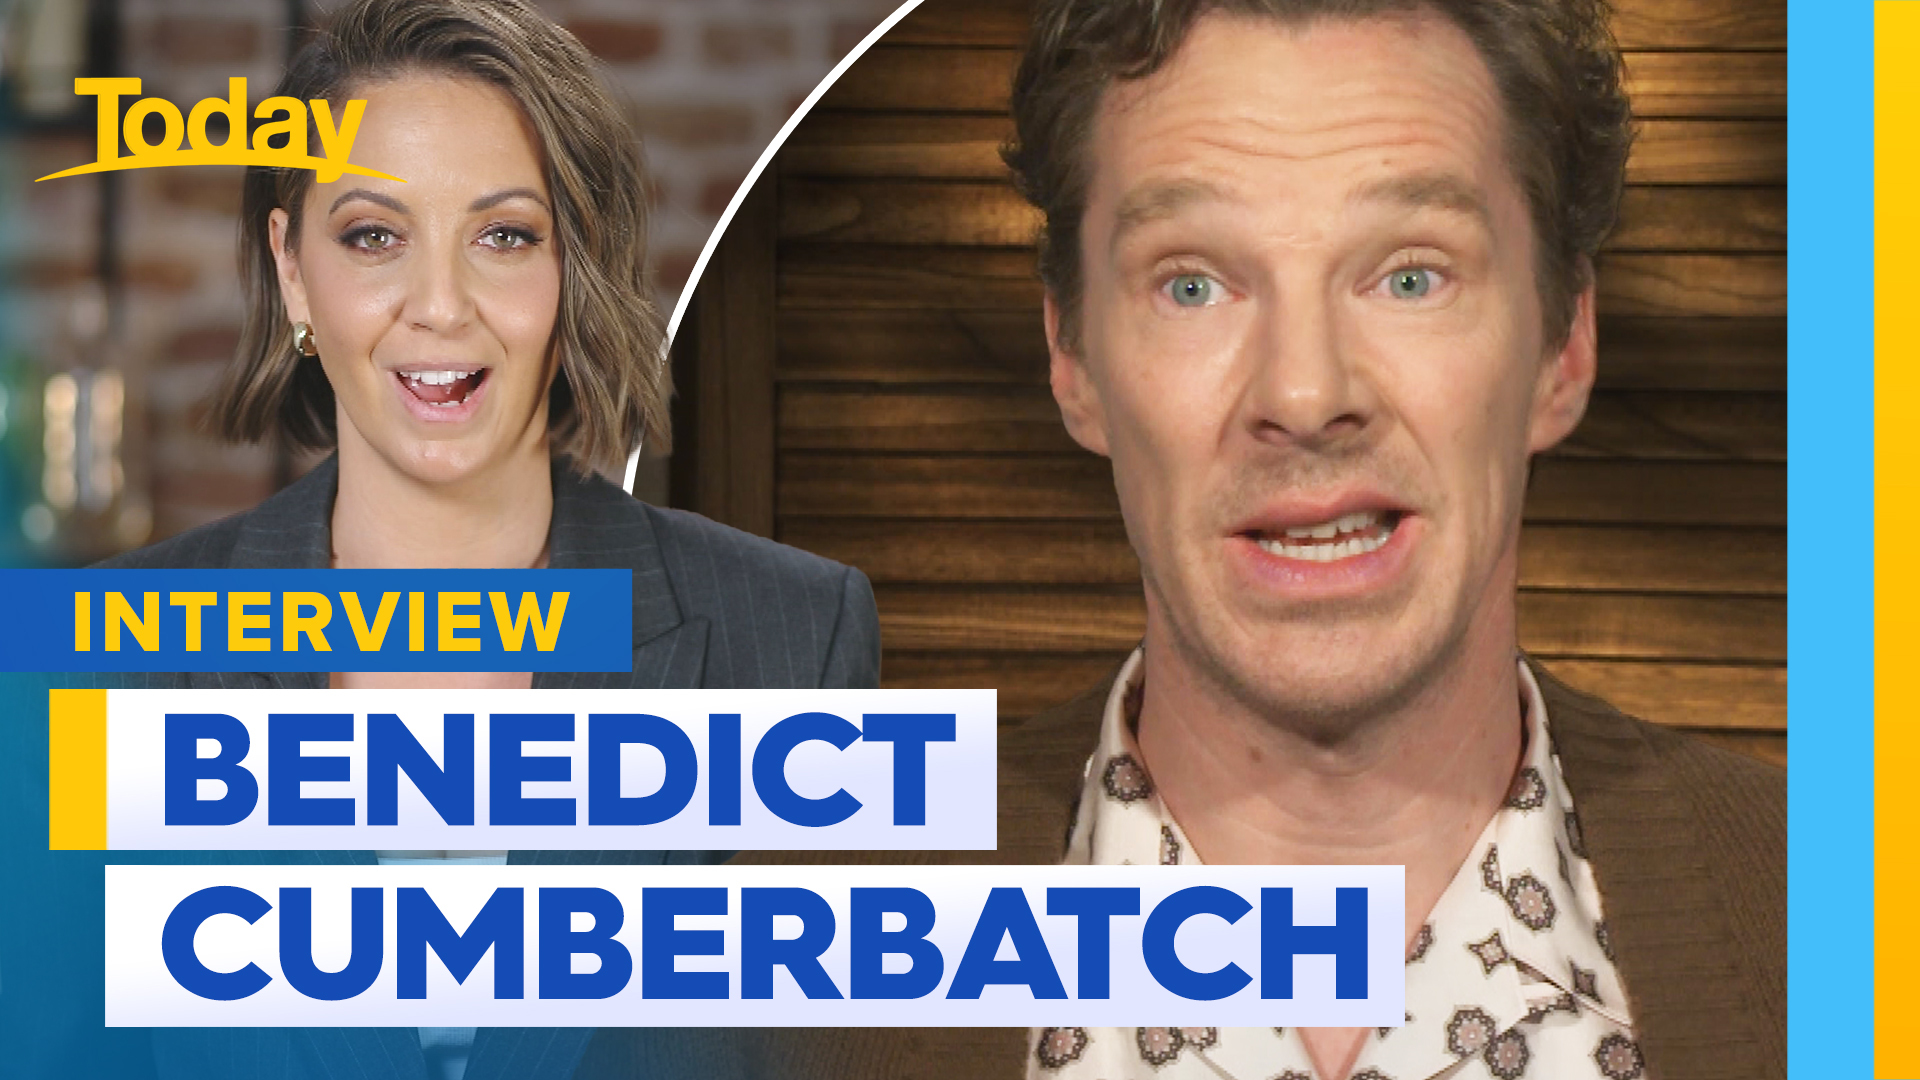 Benedict Cumberbatch catches up with Today